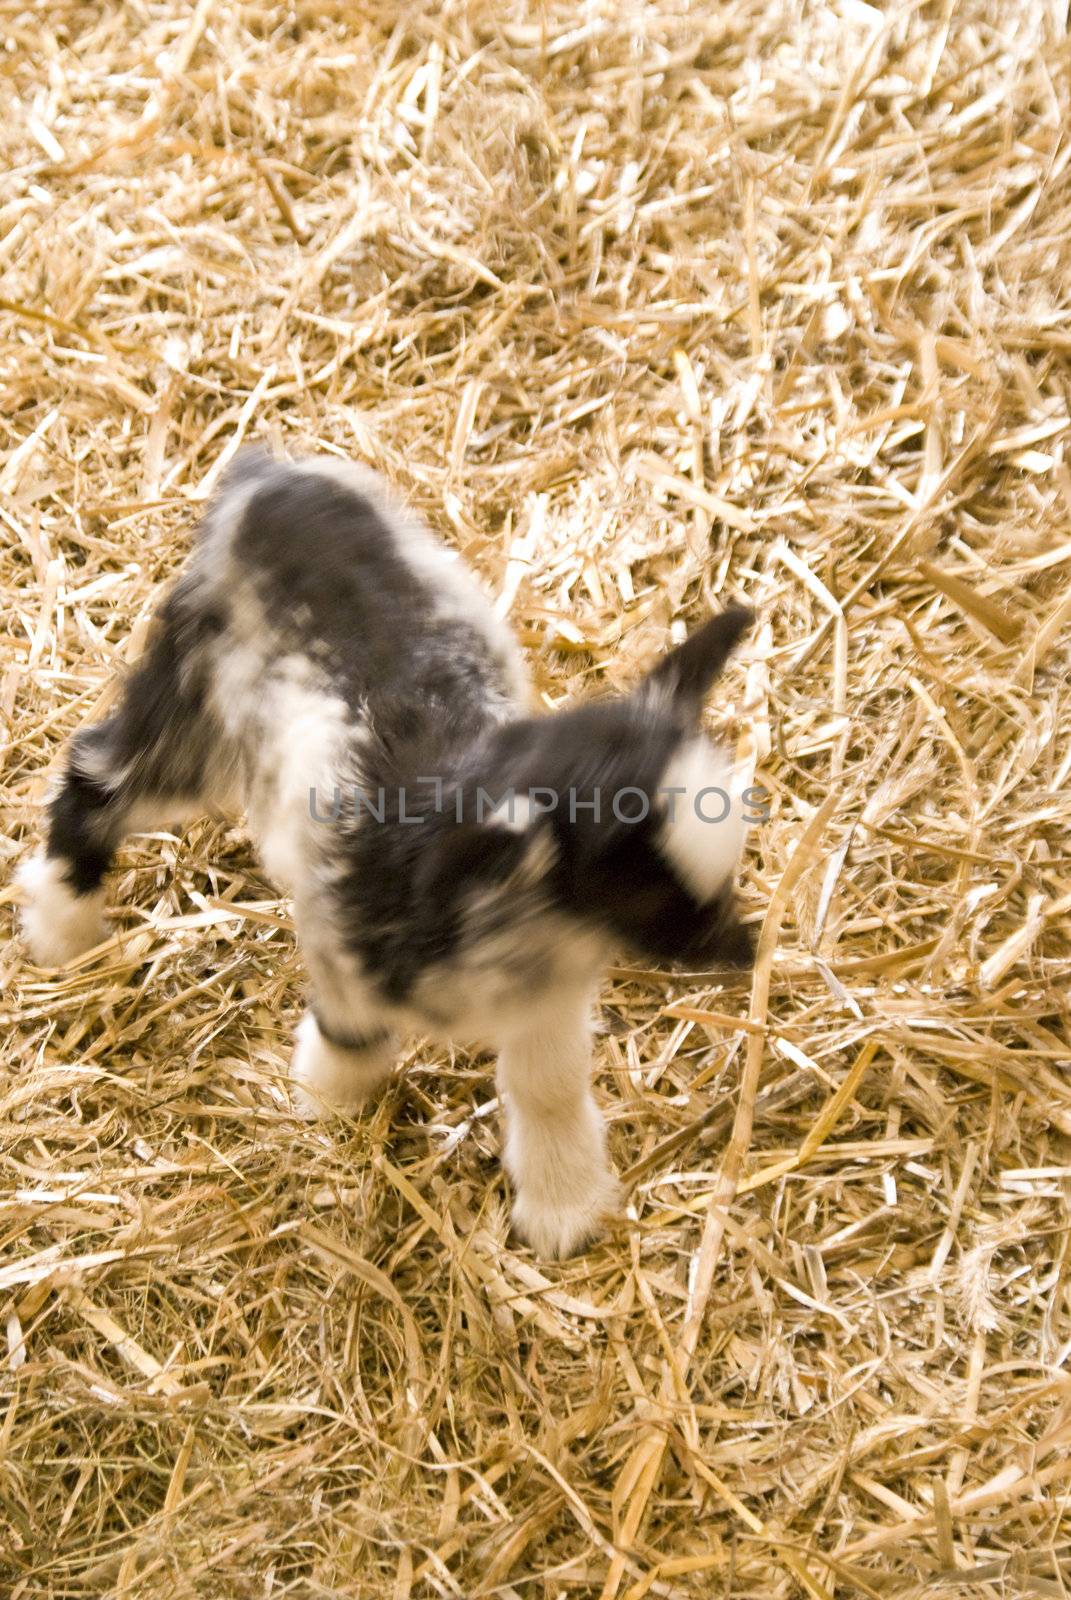 playing little goat kid in straw